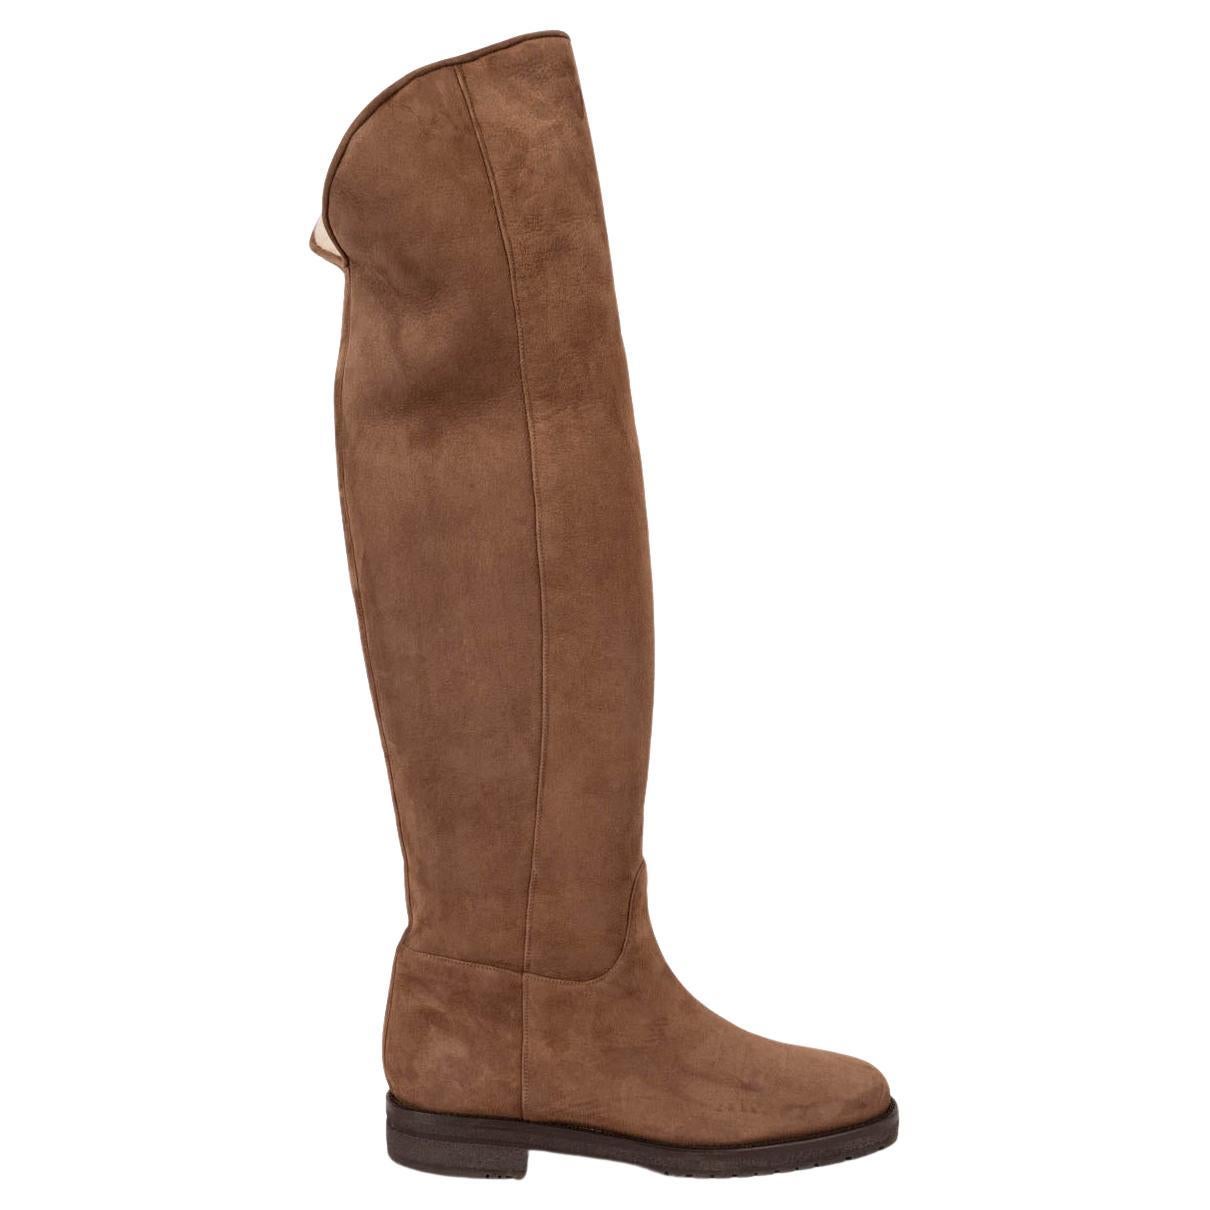 Loro Piana brown SHEARLING LINED SUEDE OVER KNEE Boots Shoes 41 en vente